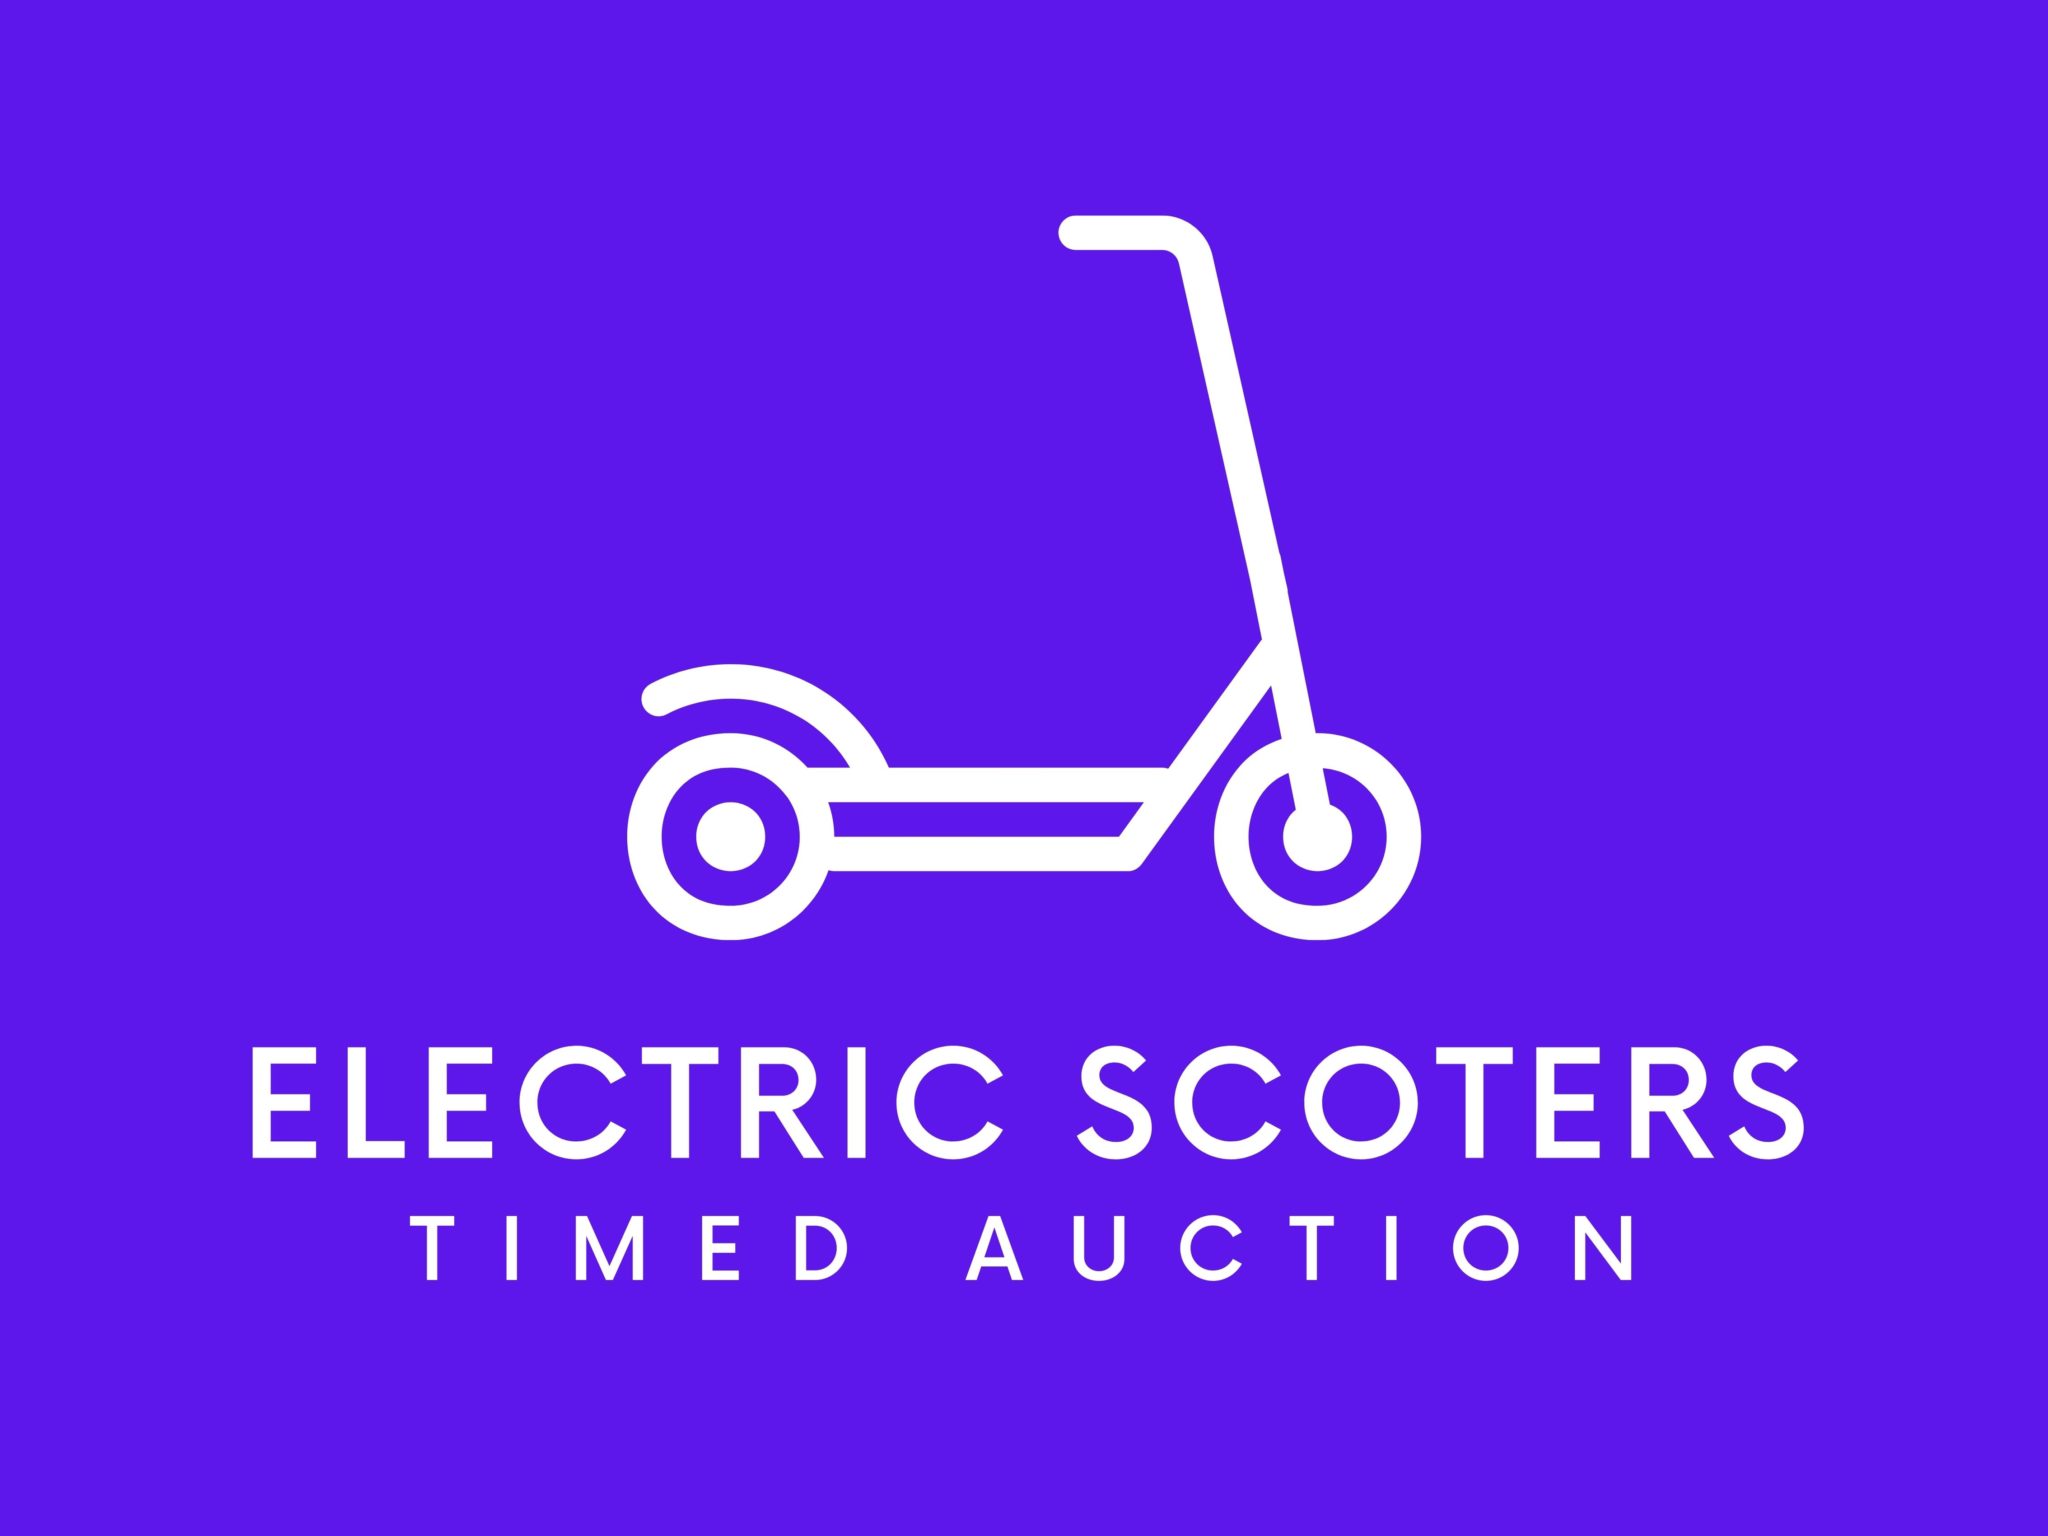 Copy of Copy of Copy of Copy of Copy of Copy of Copy of Timed Auction Scooters 10 scaled Wellers Auctions